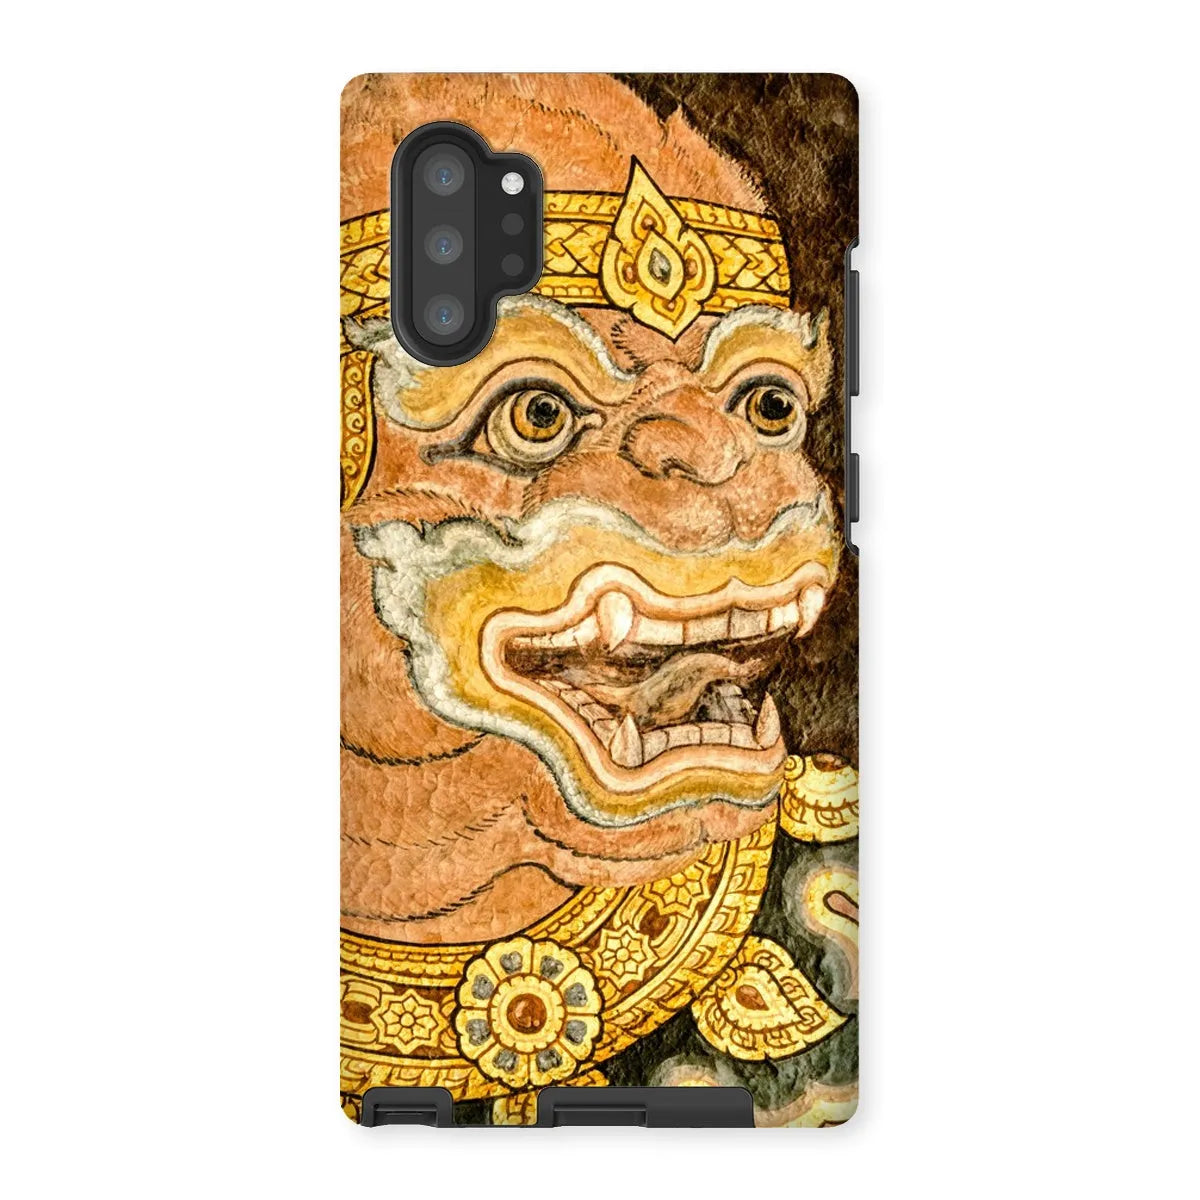 Monkey See - Traditional Thai Aesthetic Art Phone Case - Samsung Galaxy Note 10p / Matte - Mobile Phone Cases